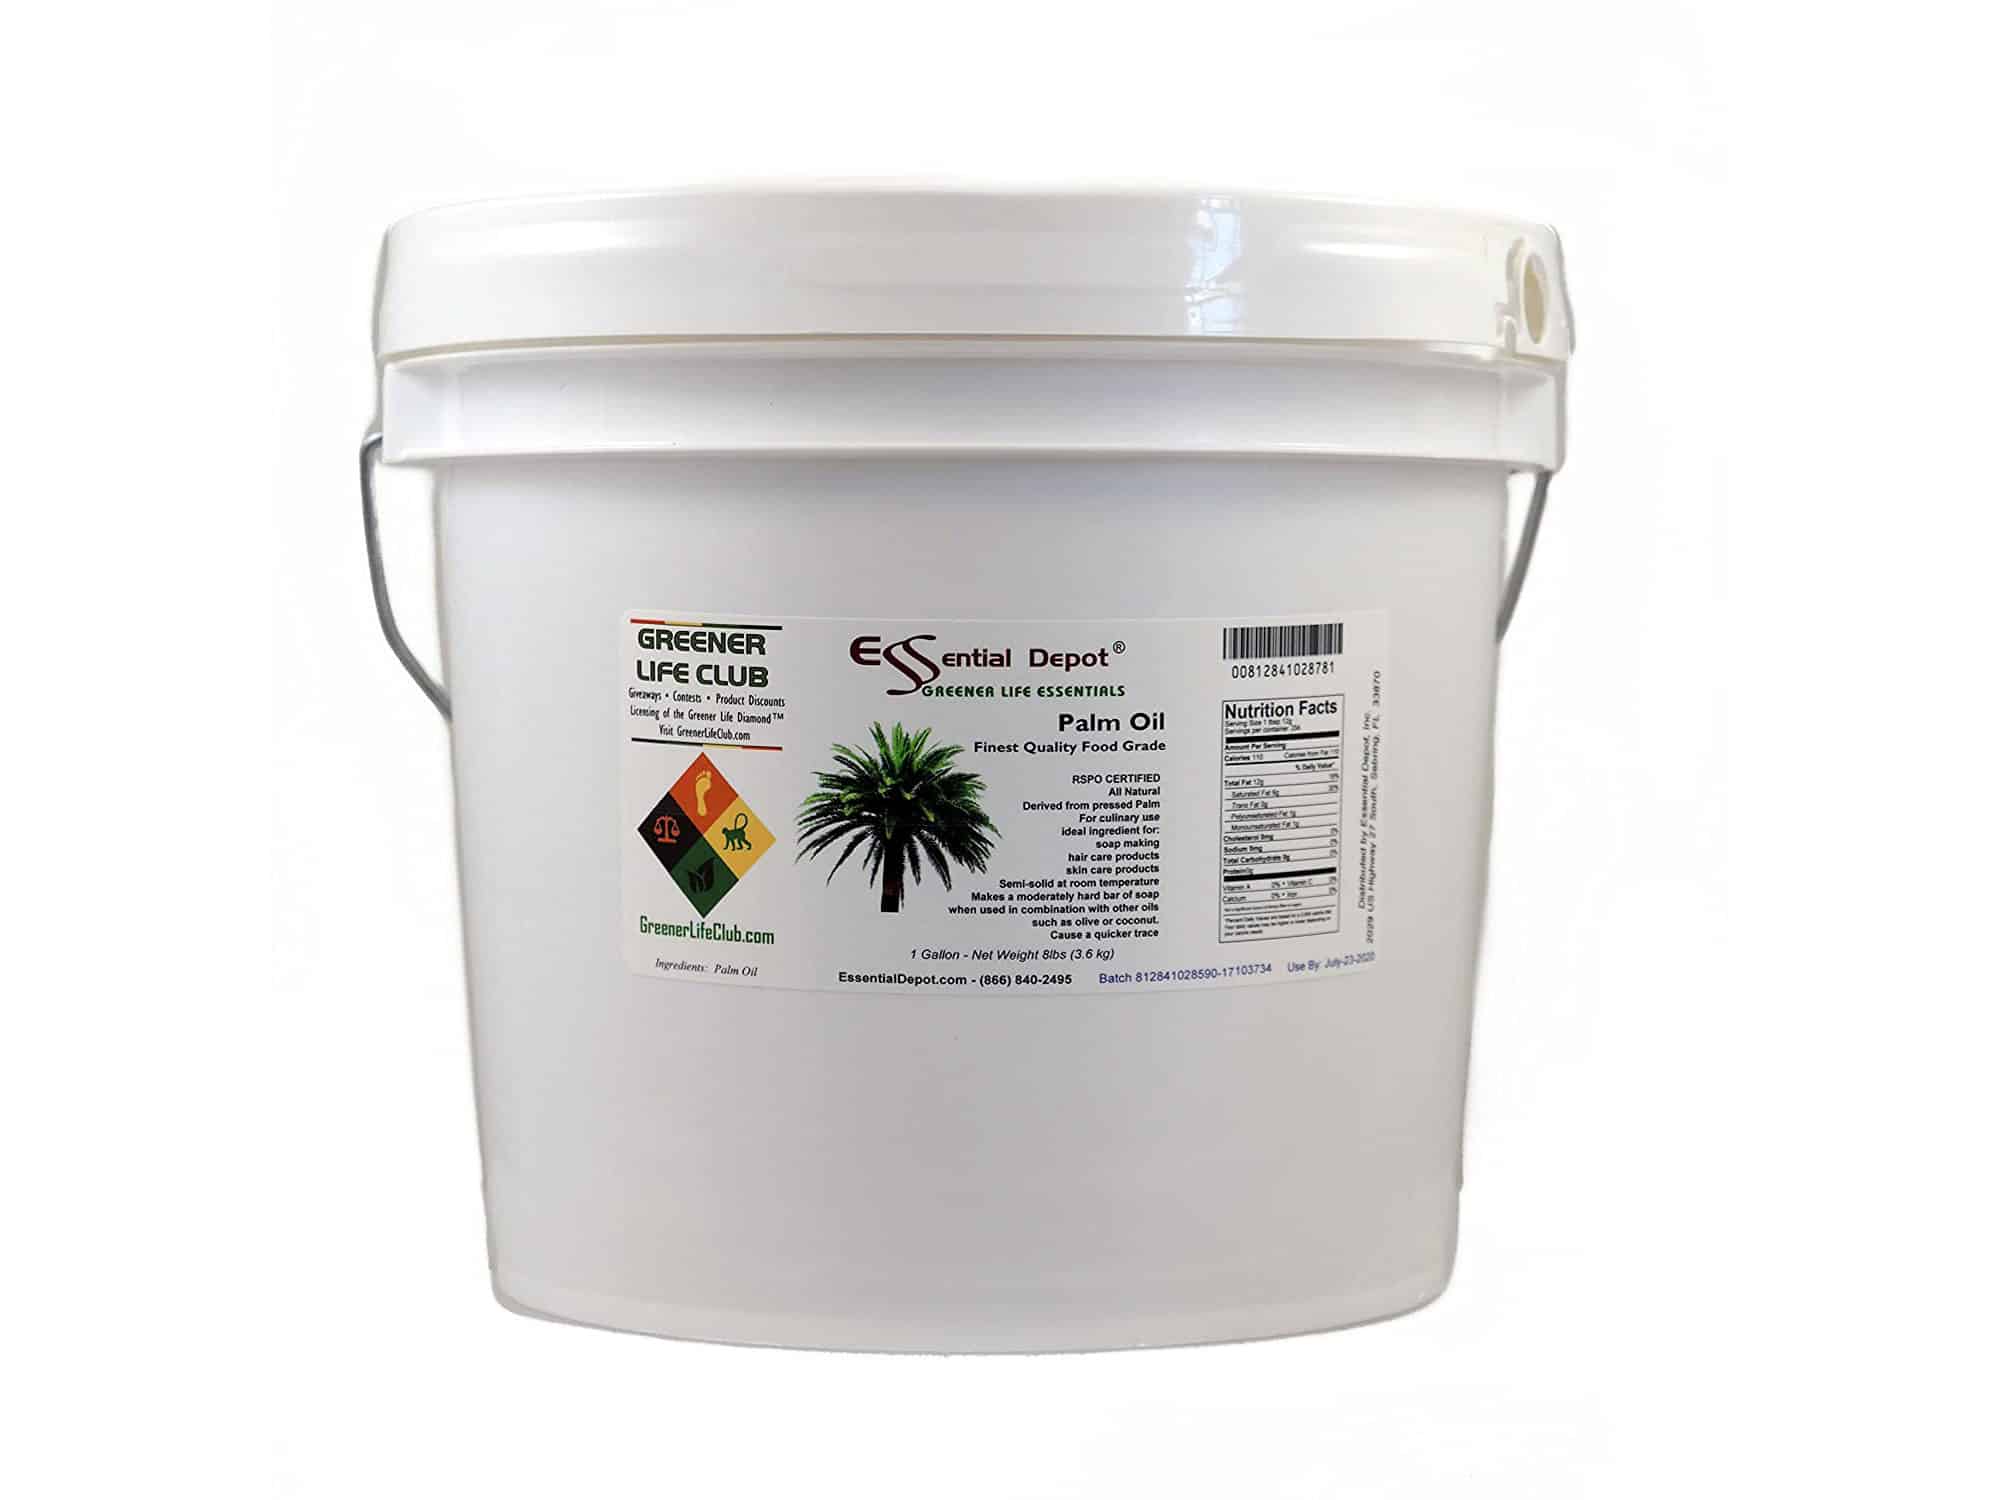 Palm Oil - RSPO Certified - Sustainable - Food Grade - Kosher - Not Hydrogenated - 8 lbs. in a 1 Gallon Pail - HDPE microwavable container with resealable lid and removable handle